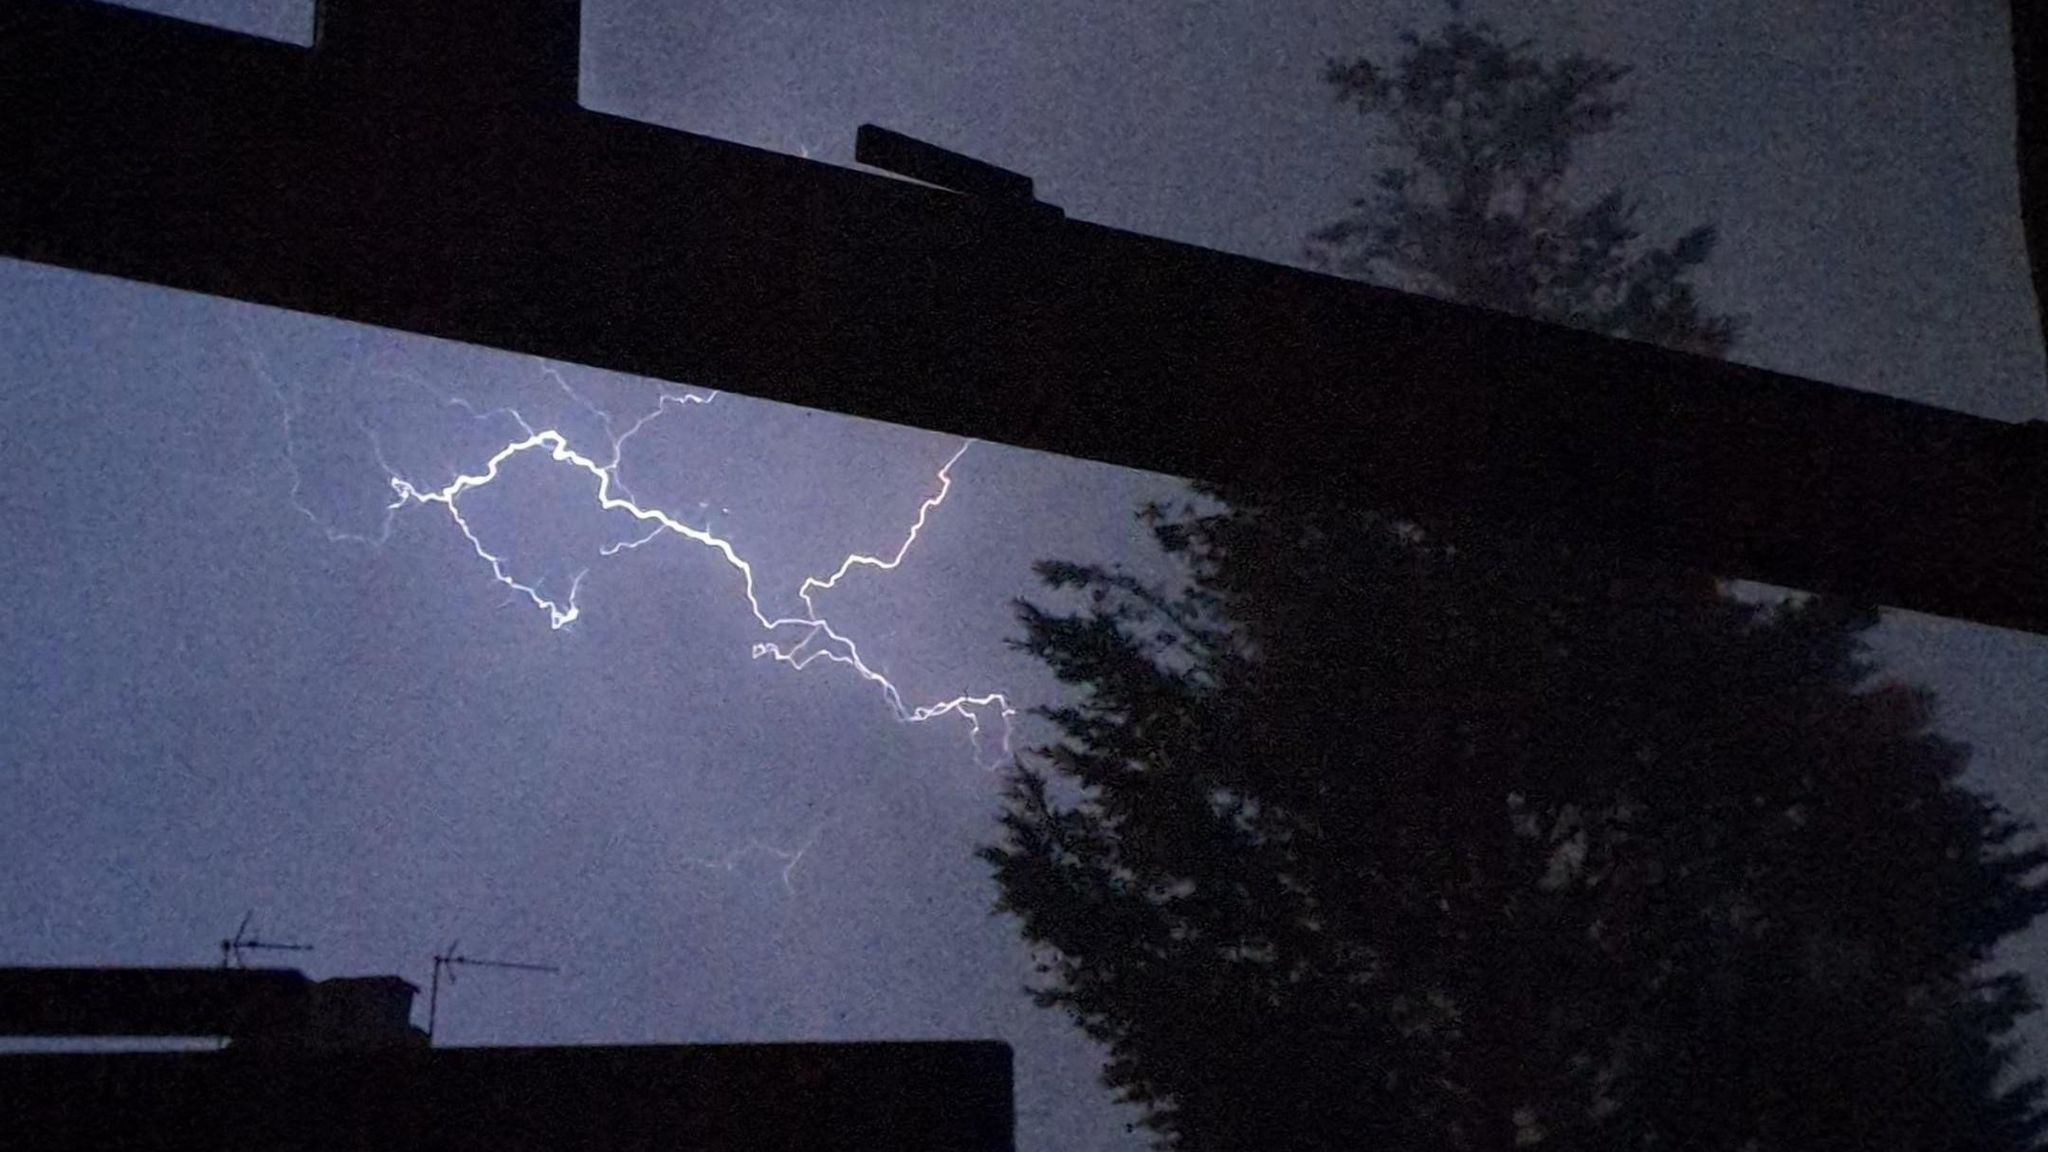 lightning seen from a window at night